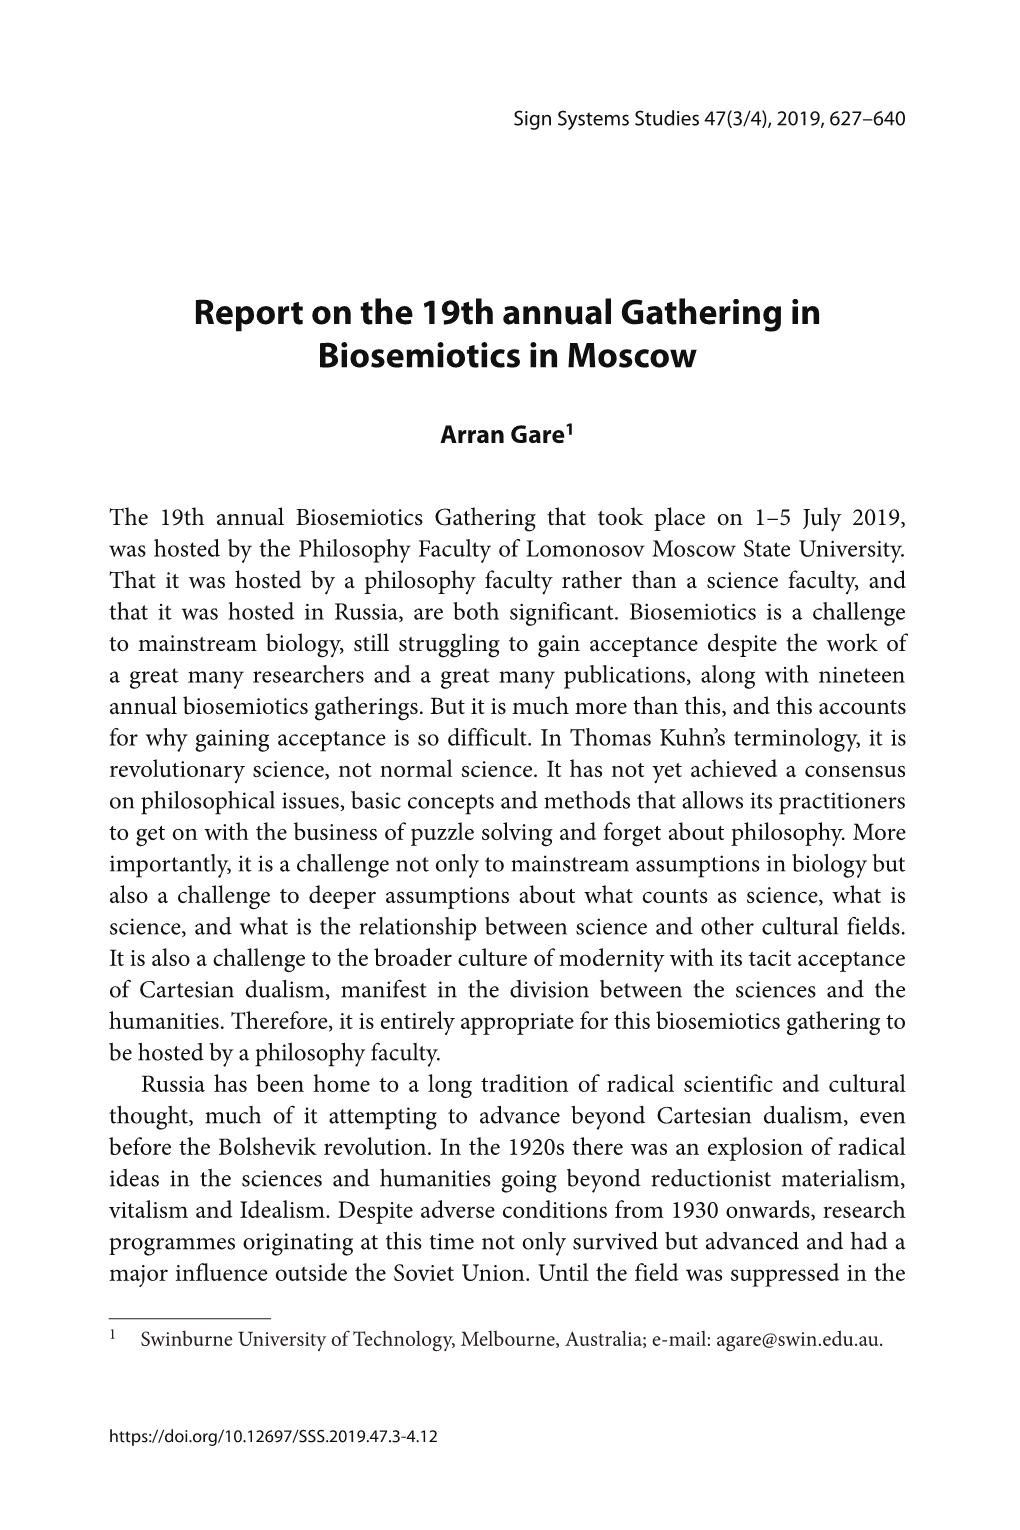 Report on the 19Th Annual Gathering in Biosemiotics in Moscow